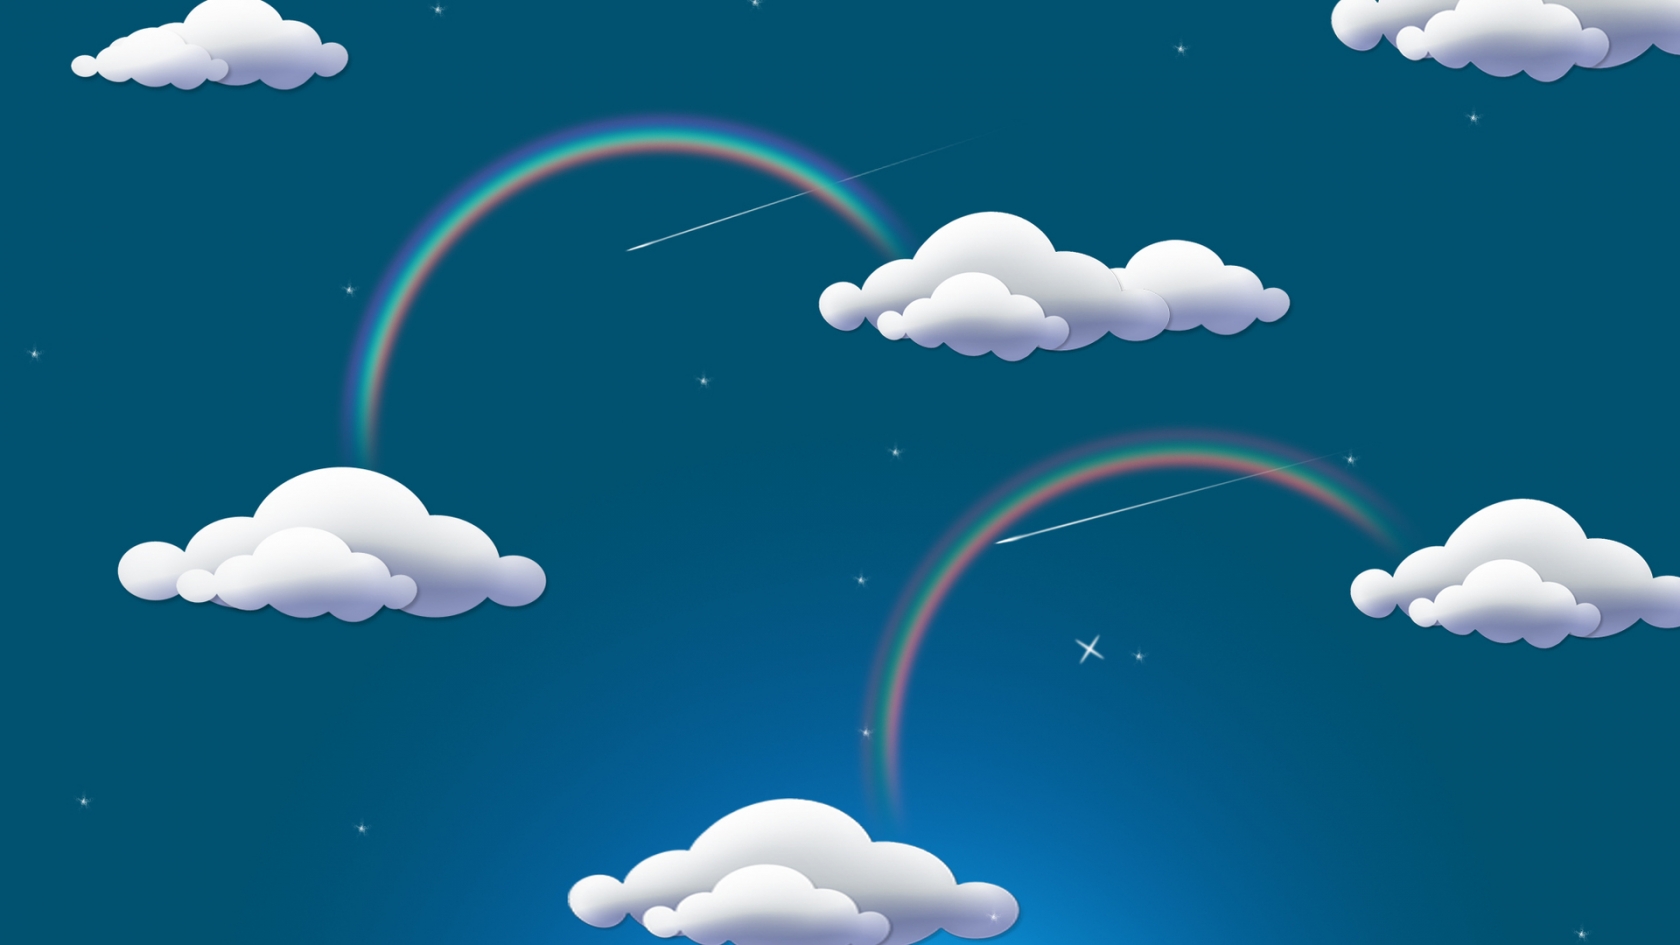 Rainbow and Clouds for 1680 x 945 HDTV resolution